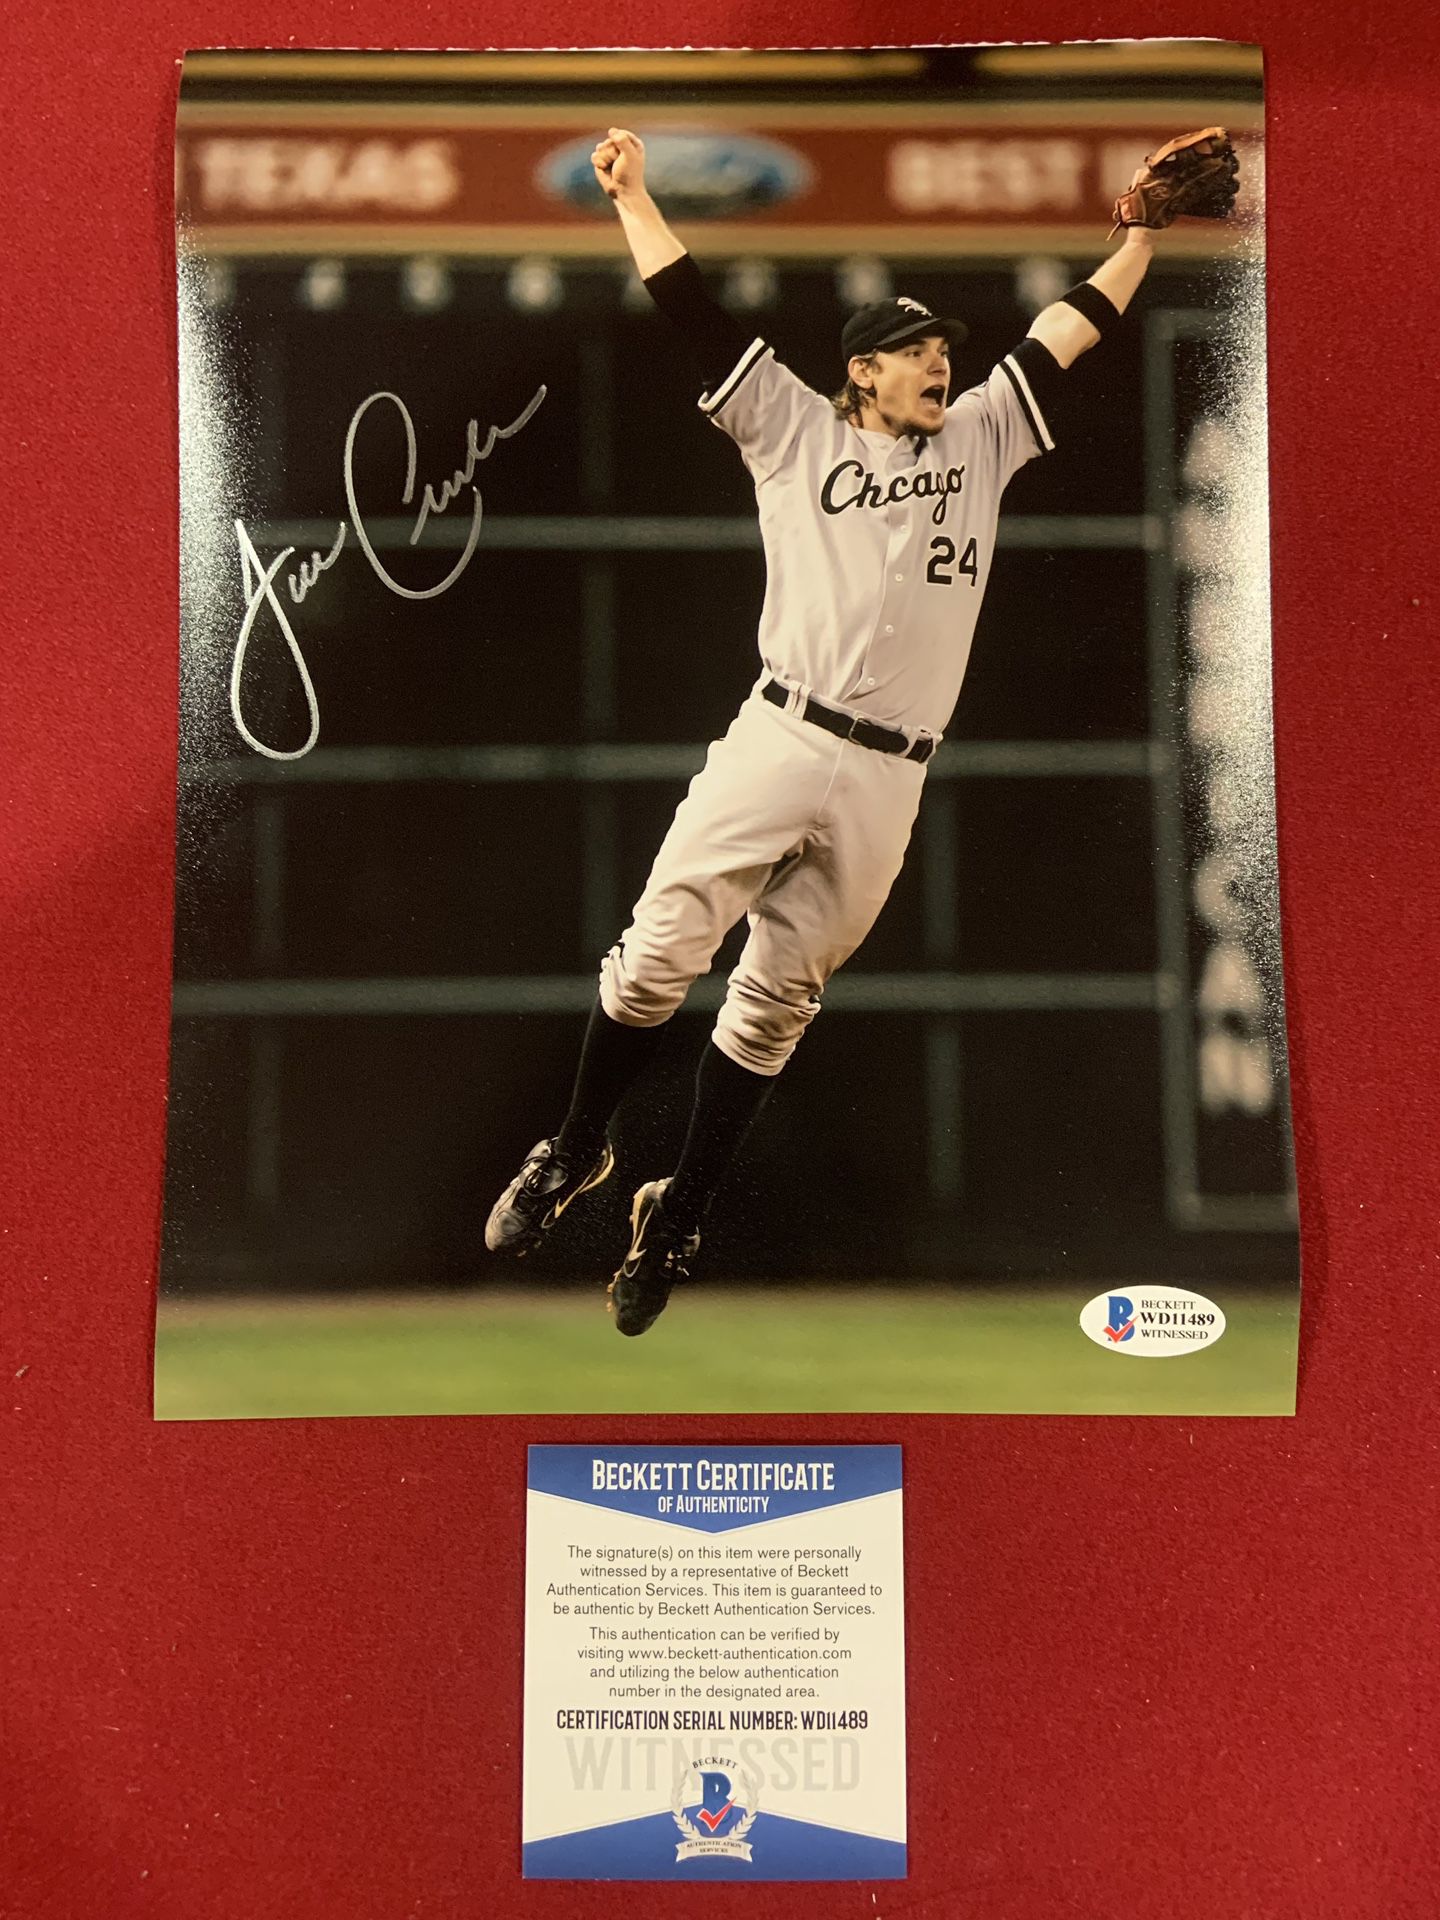 JOE CREDE Autographed 8x10 Photo with Beckett COA for Sale in